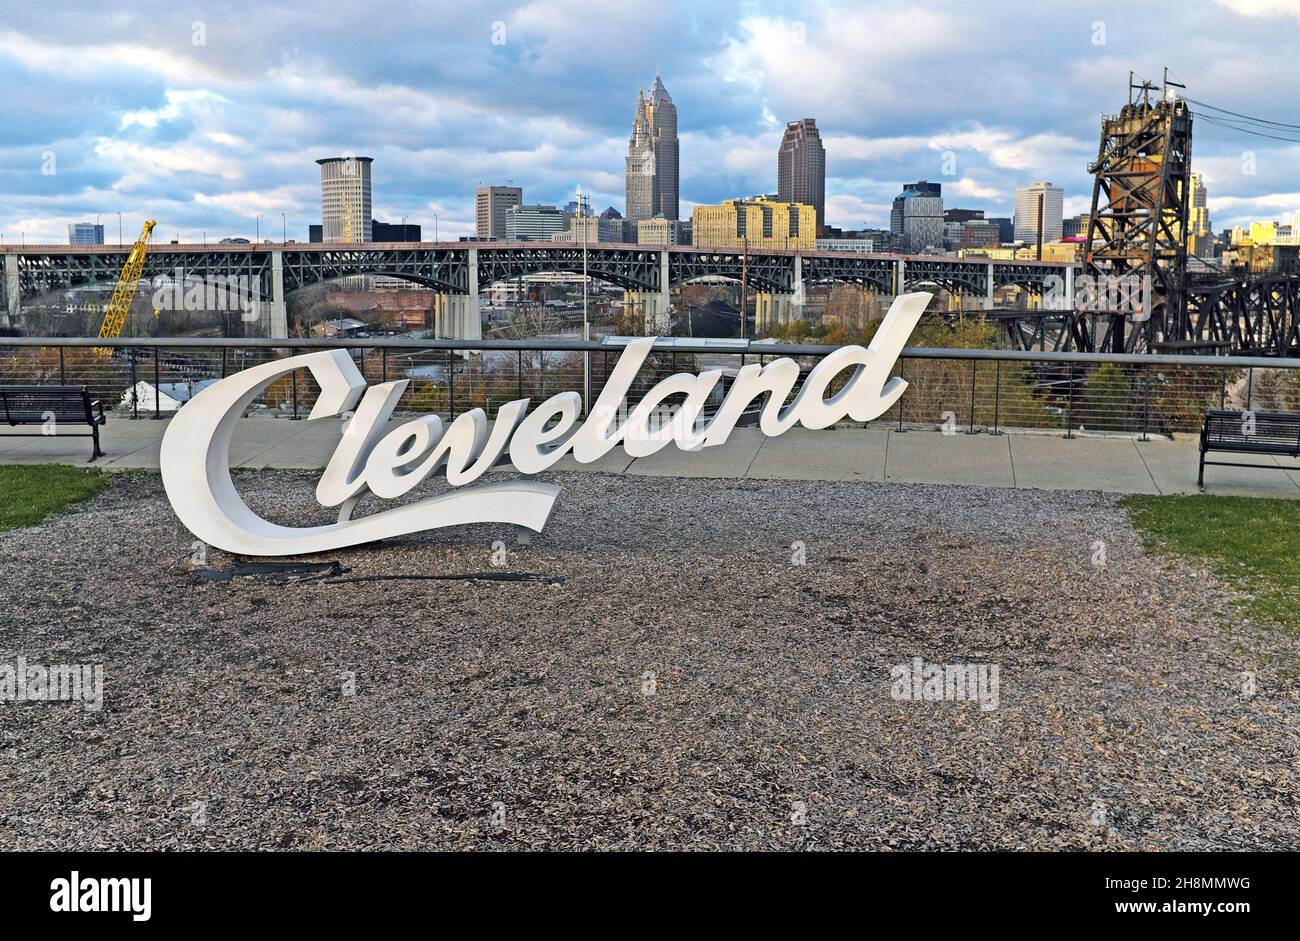 Downtown Cleveland, Ohio skyline on November 22, 2021 as seen from the Cleveland sign in the Tremont neighborhood. Stock Photo